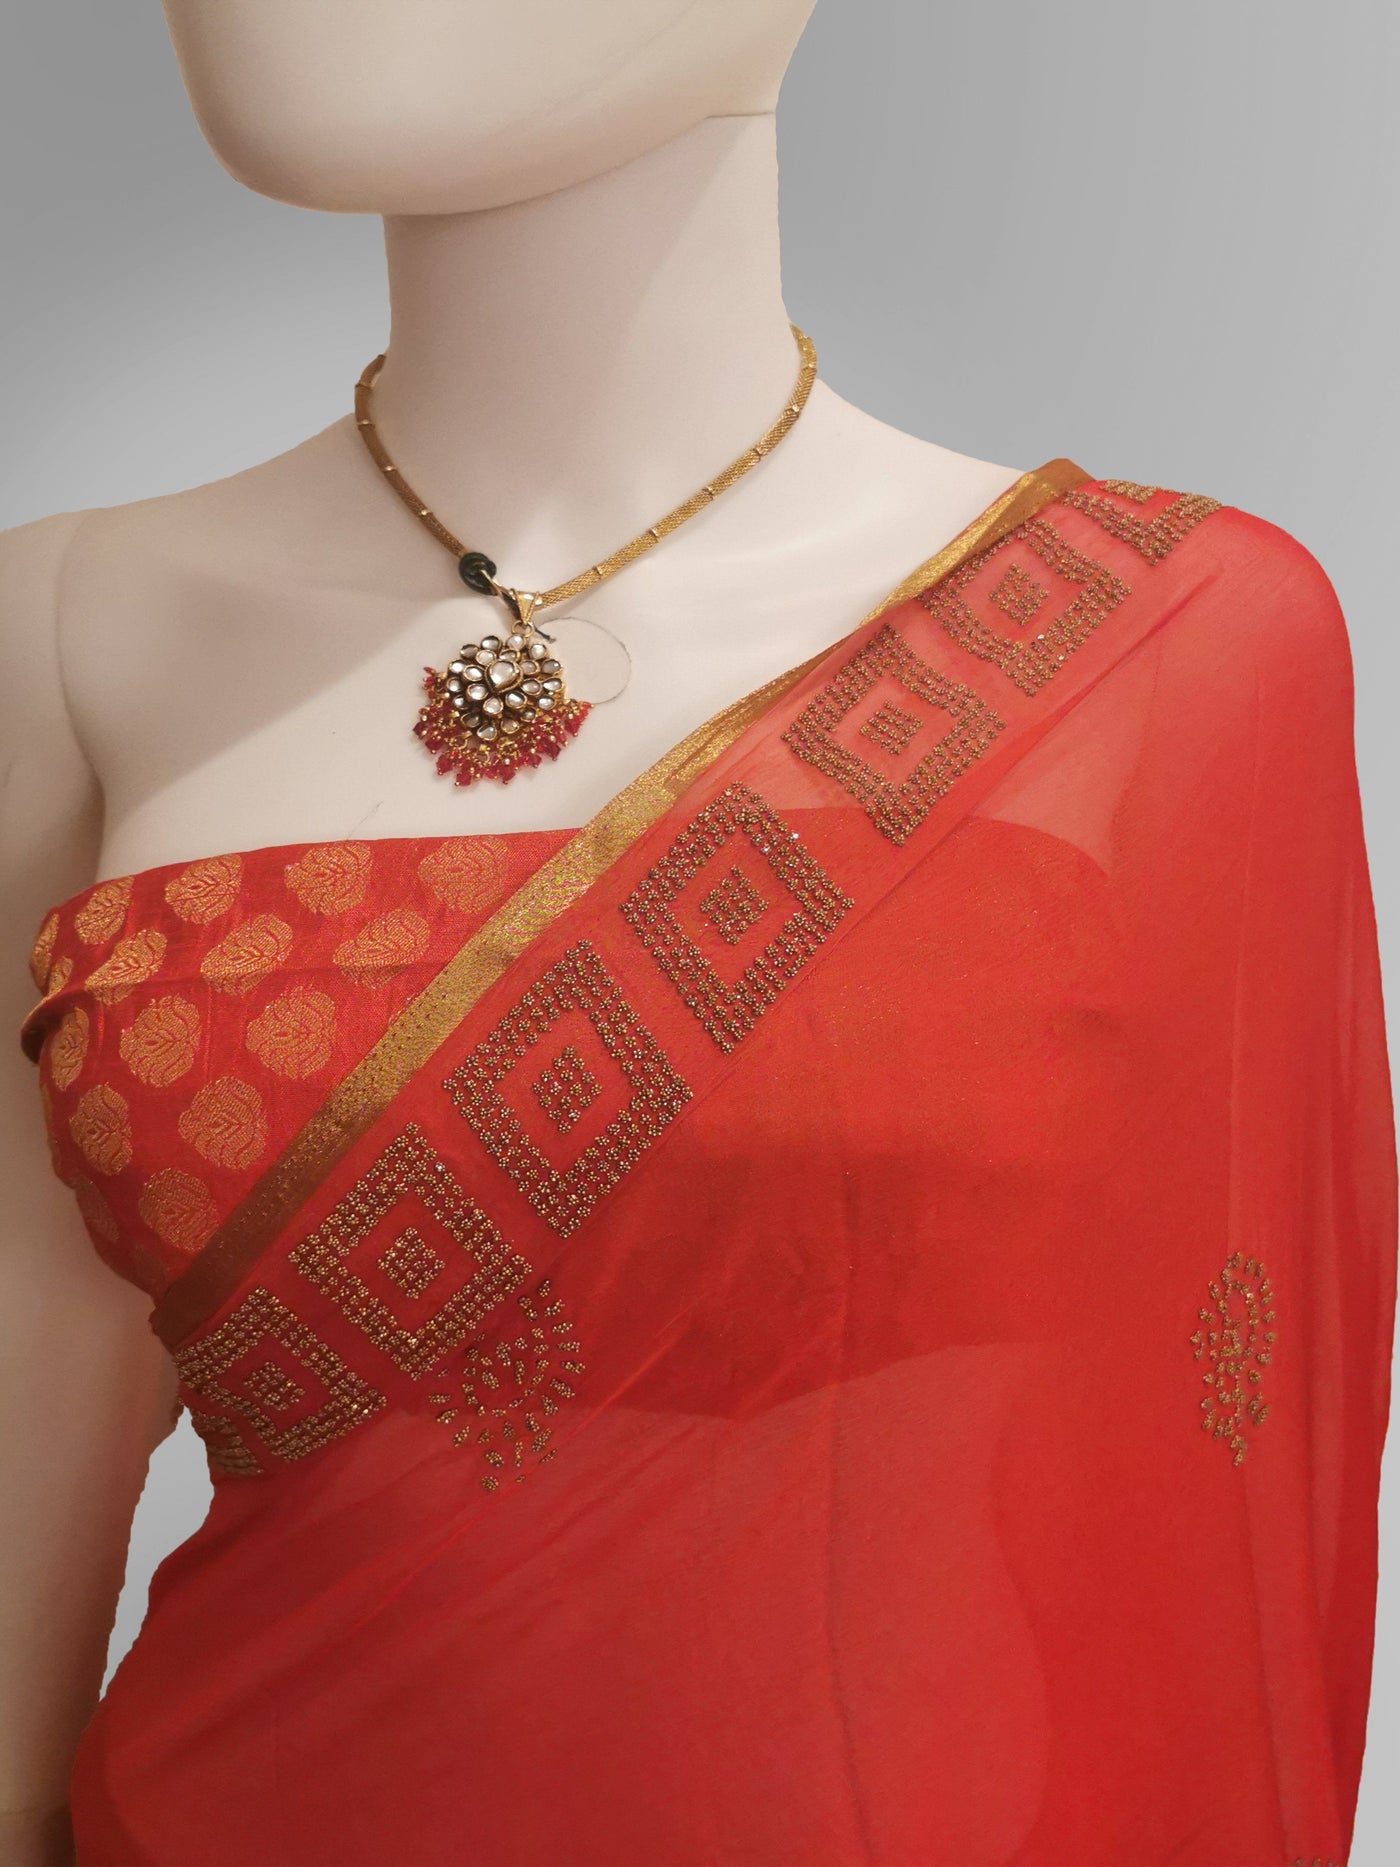 Saree in Fiery Red With Subtle Golden Embroidery Indian Clothing in Denver, CO, Aurora, CO, Boulder, CO, Fort Collins, CO, Colorado Springs, CO, Parker, CO, Highlands Ranch, CO, Cherry Creek, CO, Centennial, CO, and Longmont, CO. NATIONWIDE SHIPPING USA- India Fashion X